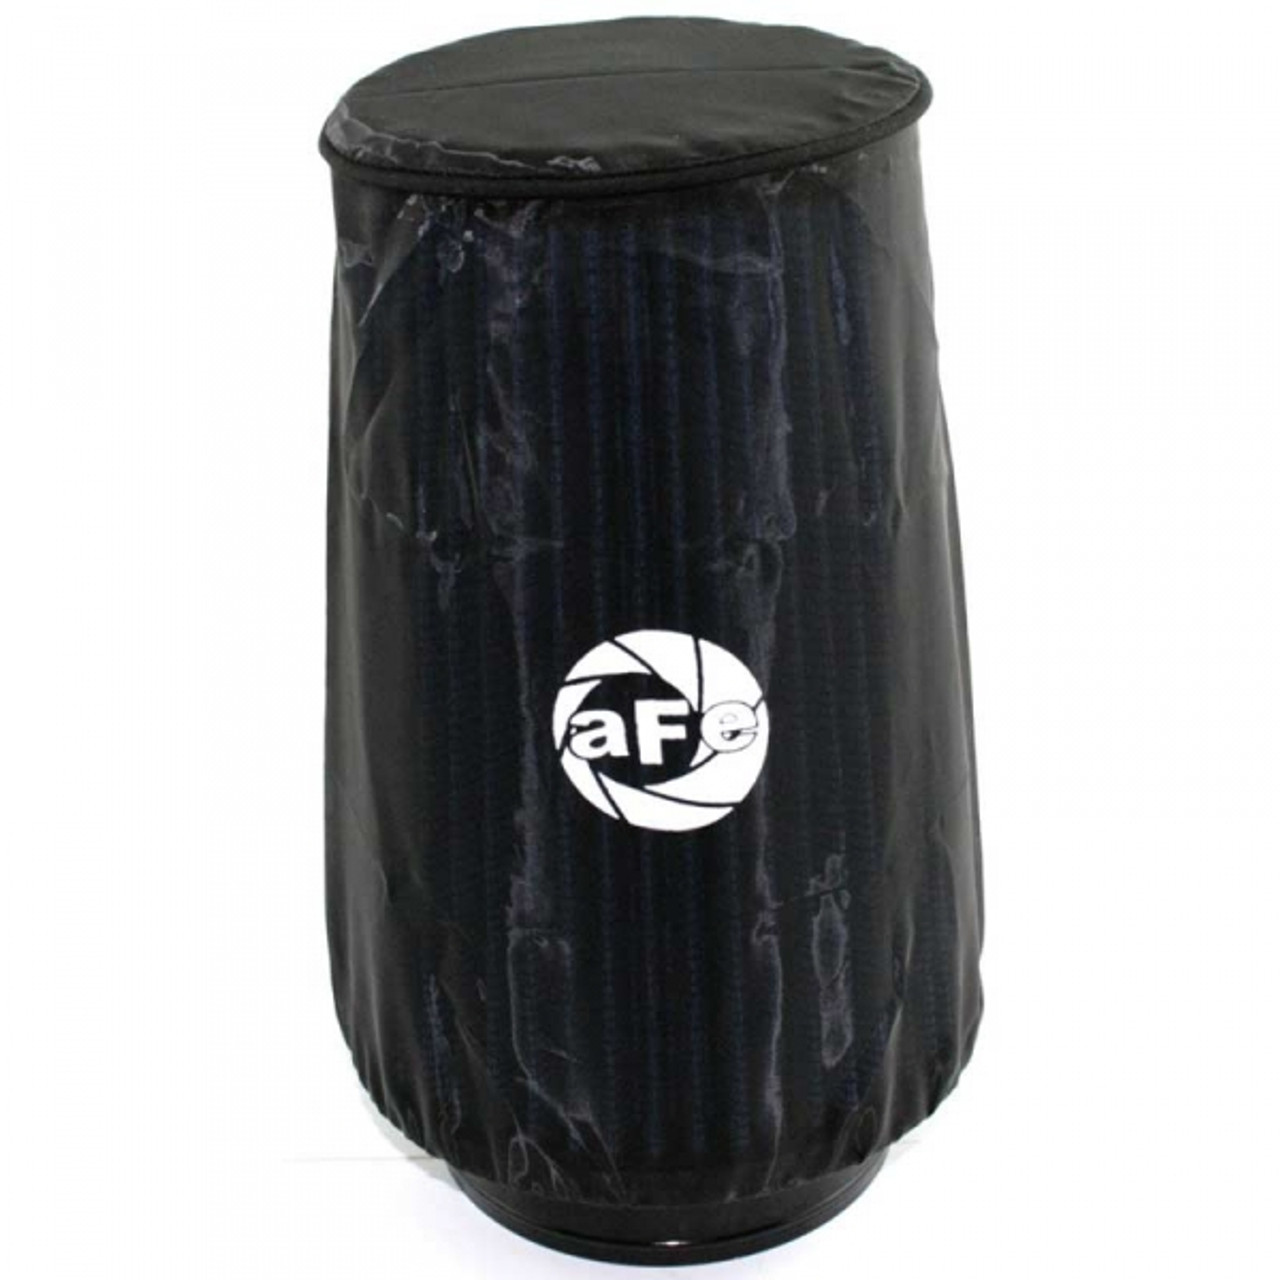 AFE Magnum Shield Pre Filter (Size 6"B x 4 3/4"T x 9"H) (AFE28-10013)-Main View